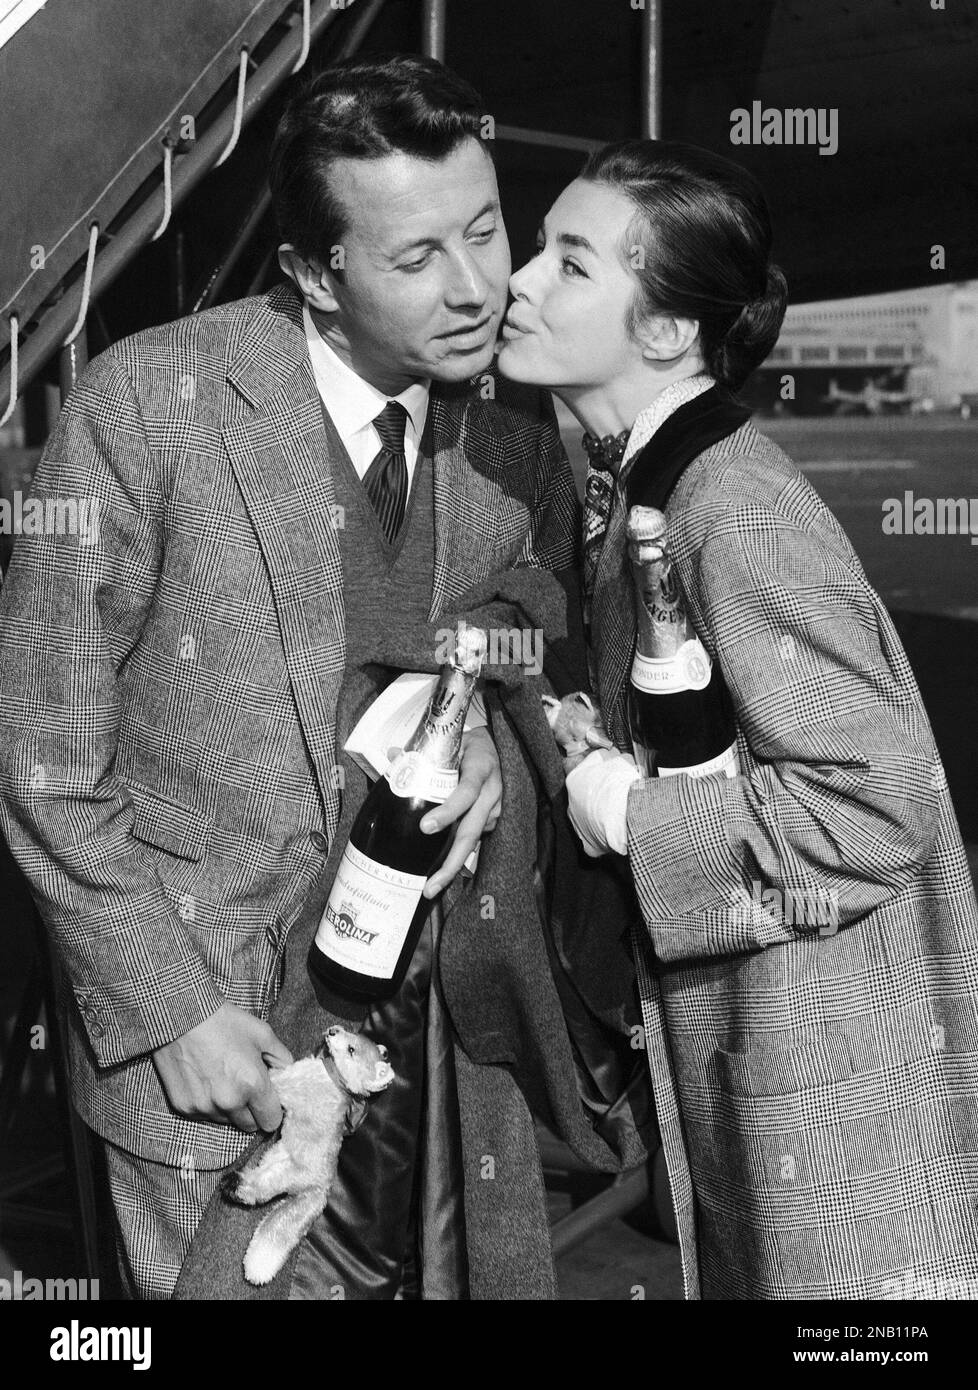 French actor Michel Auclair is greeted by German actress Marianne Koch upon his arrival on October 2, 1957 at the Tempelhof airport in Berlin, Germany picture